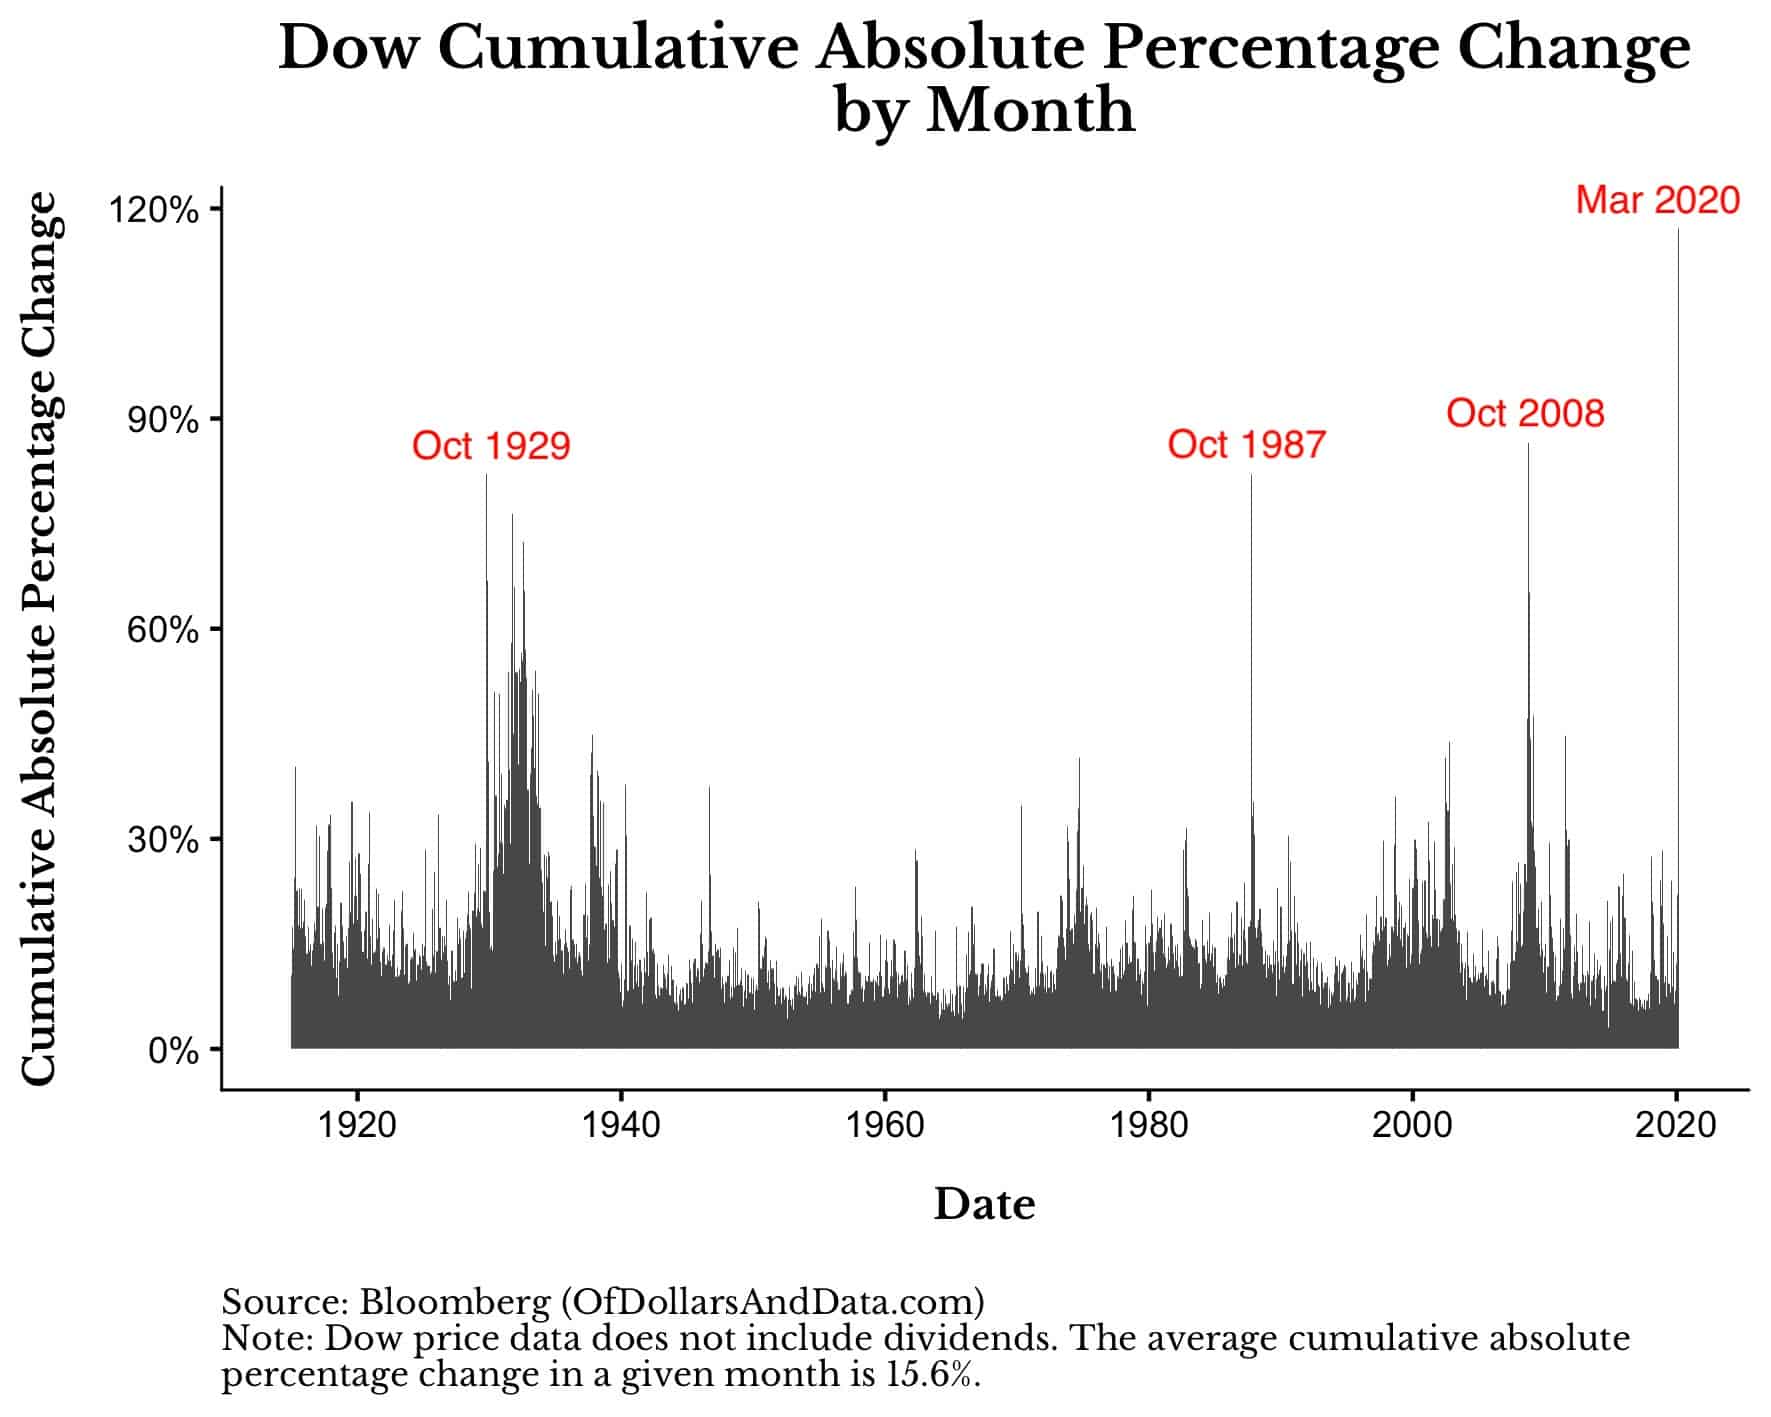 Dow Jones Industrial Average absolute cumulative percentage change by month since 1915